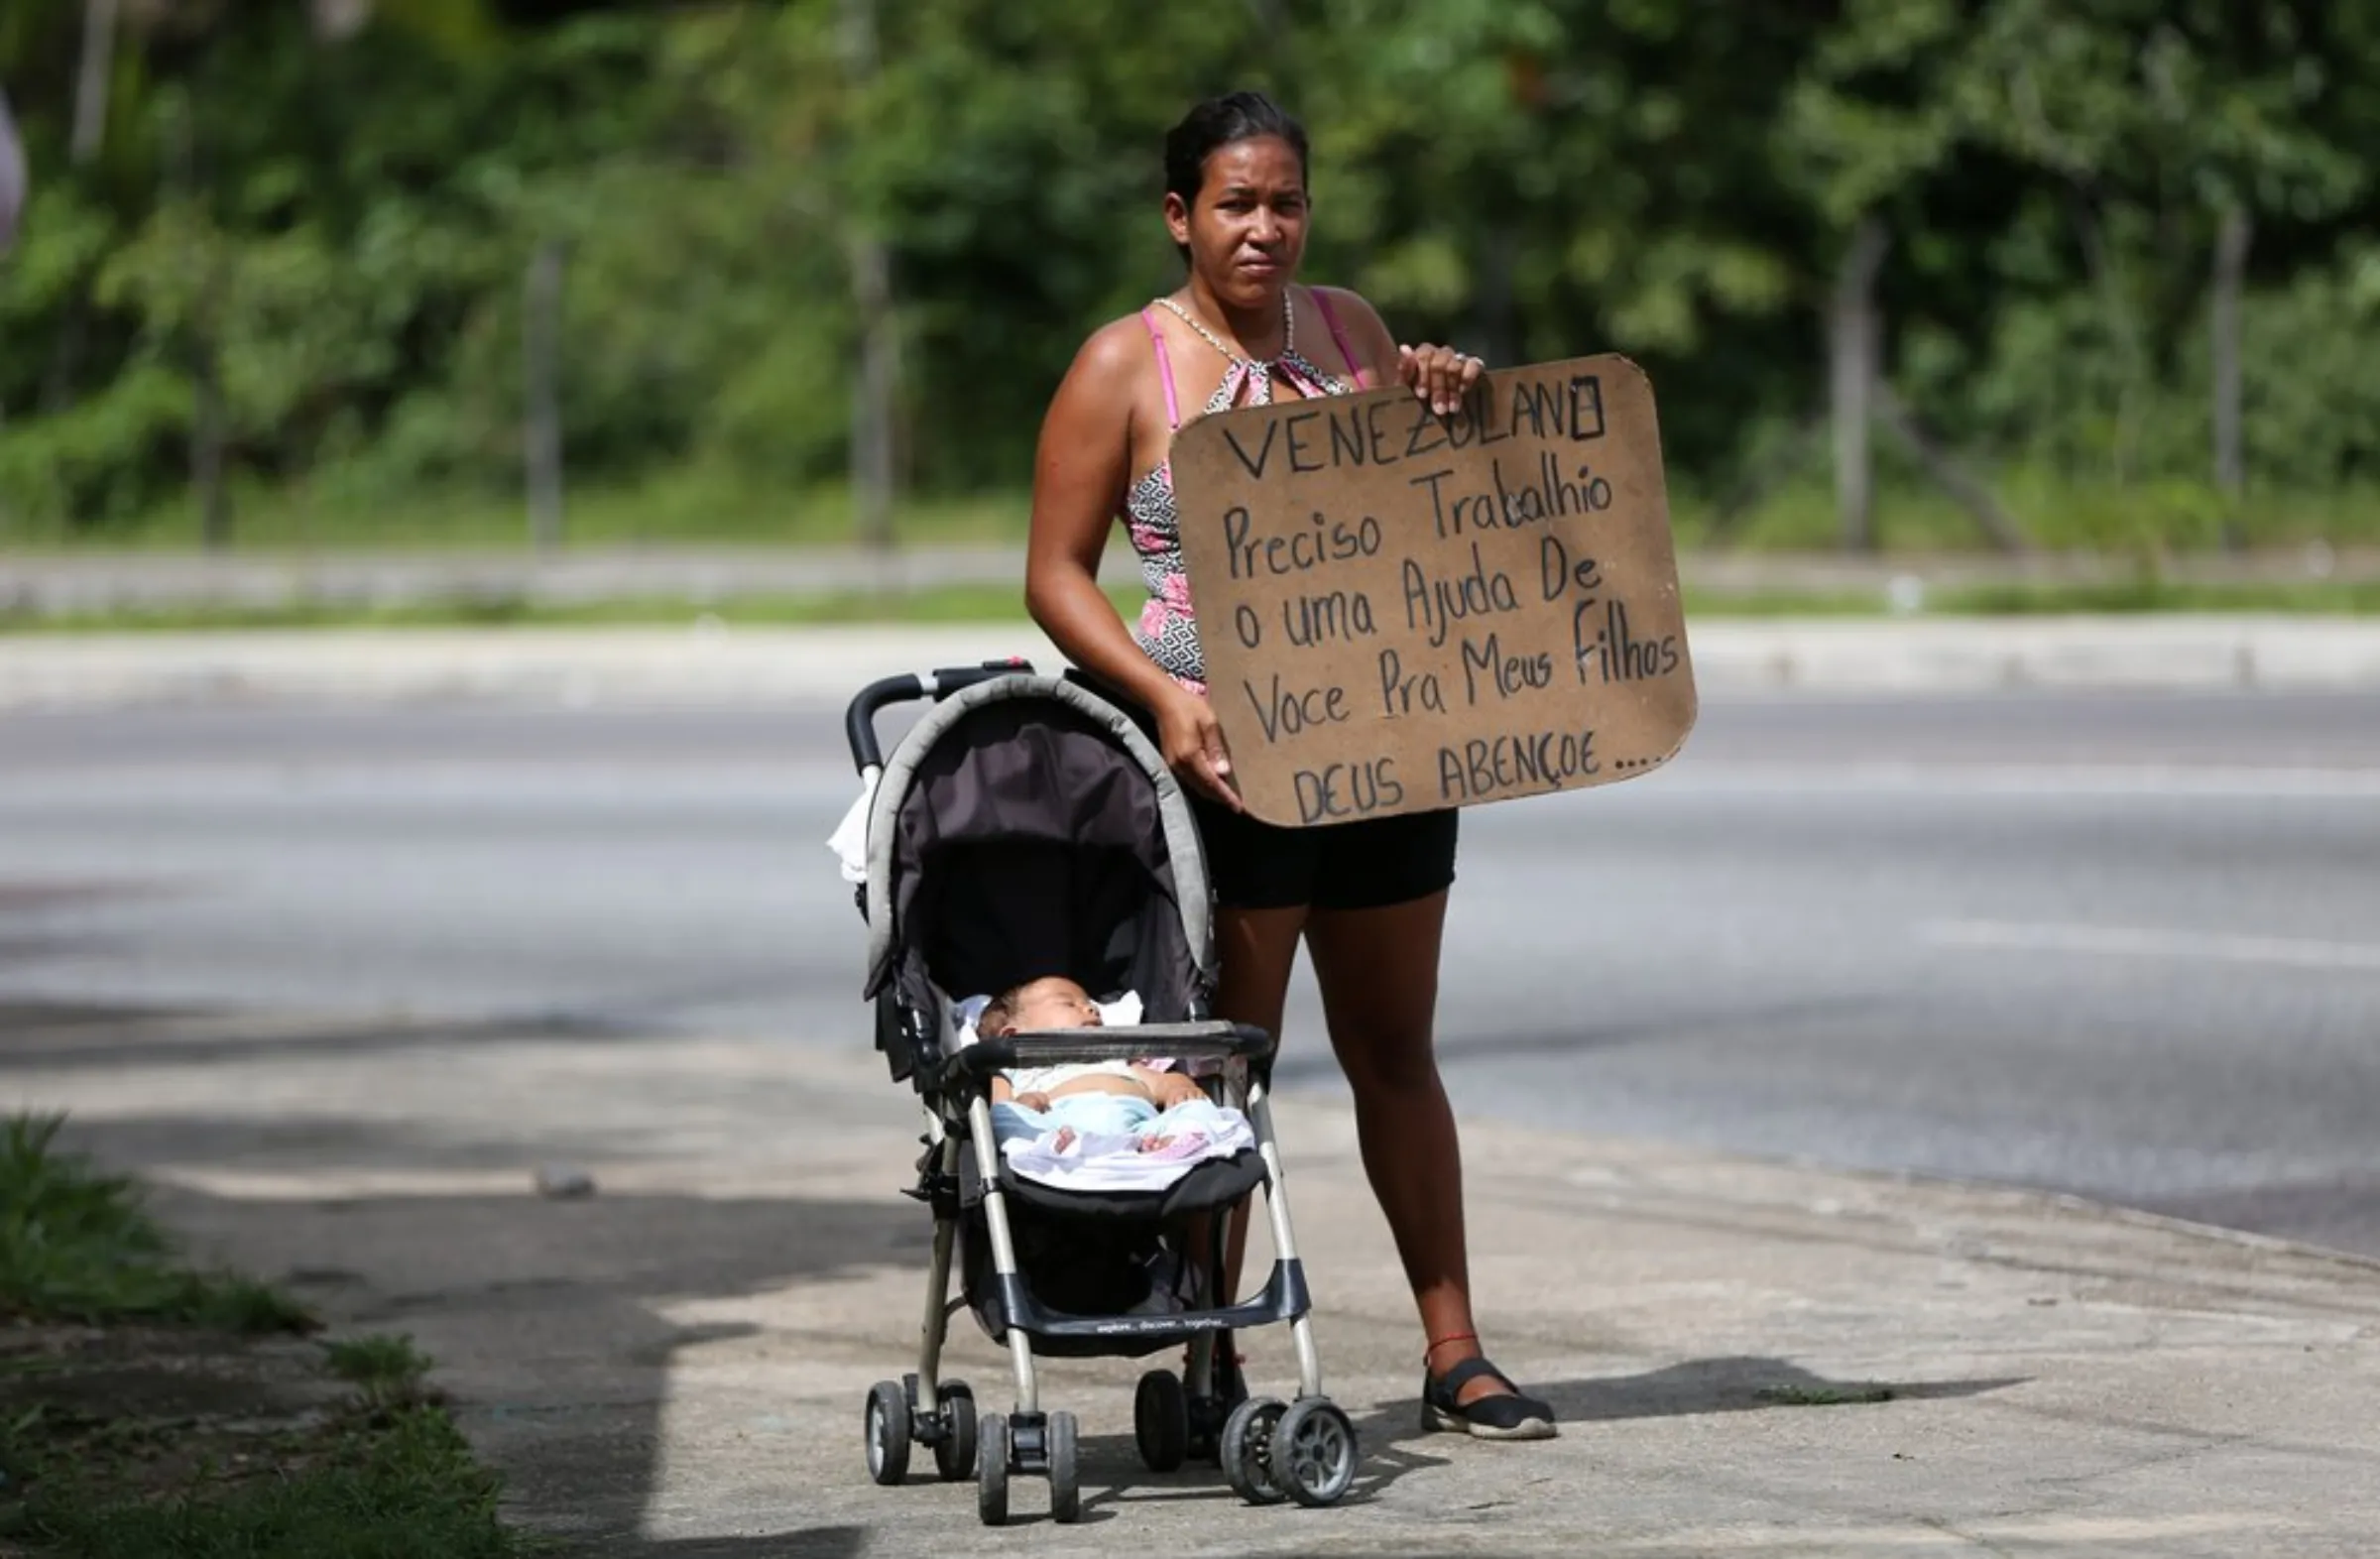 Venezuelan Liorkis Marke, 35, poses as she shows a cardboard that reads 'Venezuelan needs work or help for my children. God bless you' in Manaus, Brazil January 14, 2019